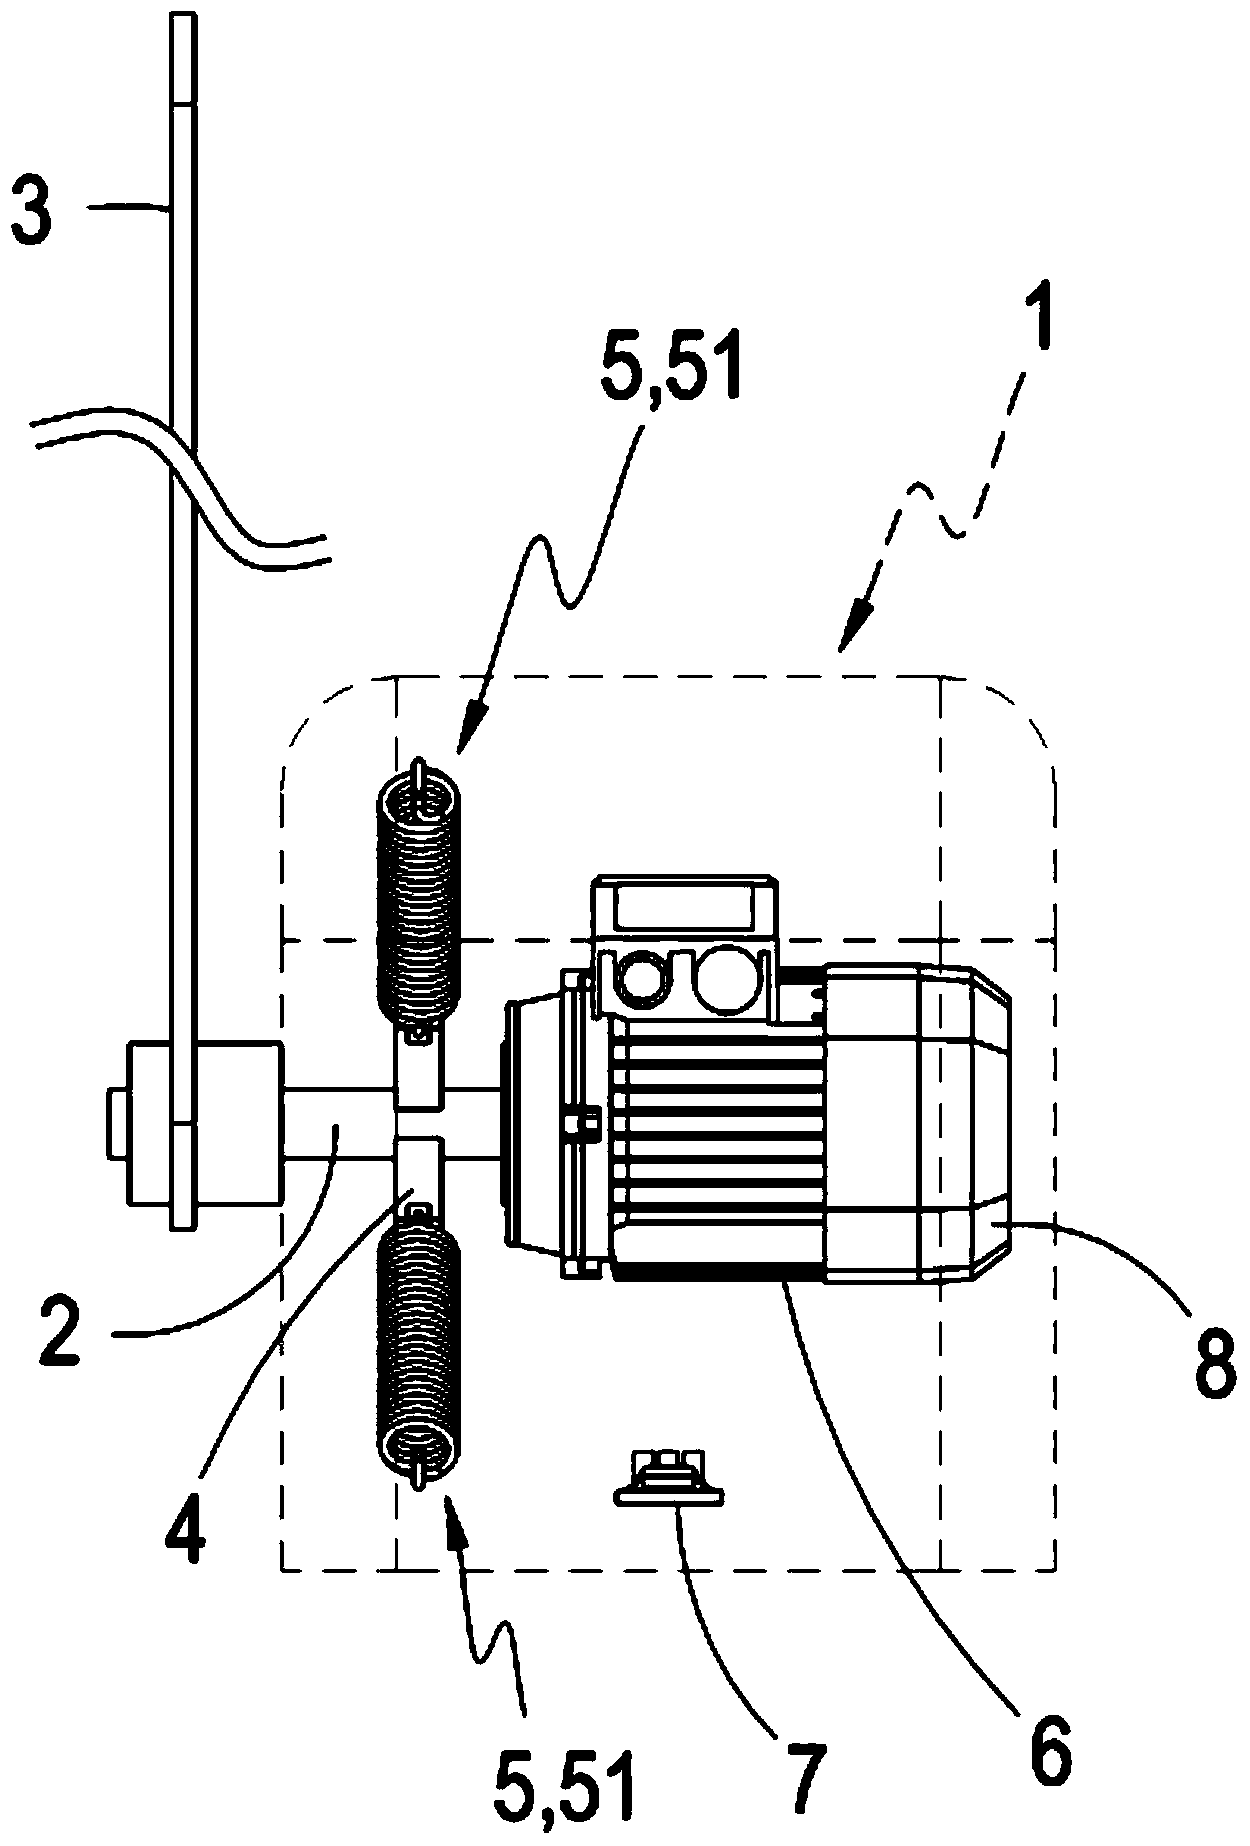 Door and gate device